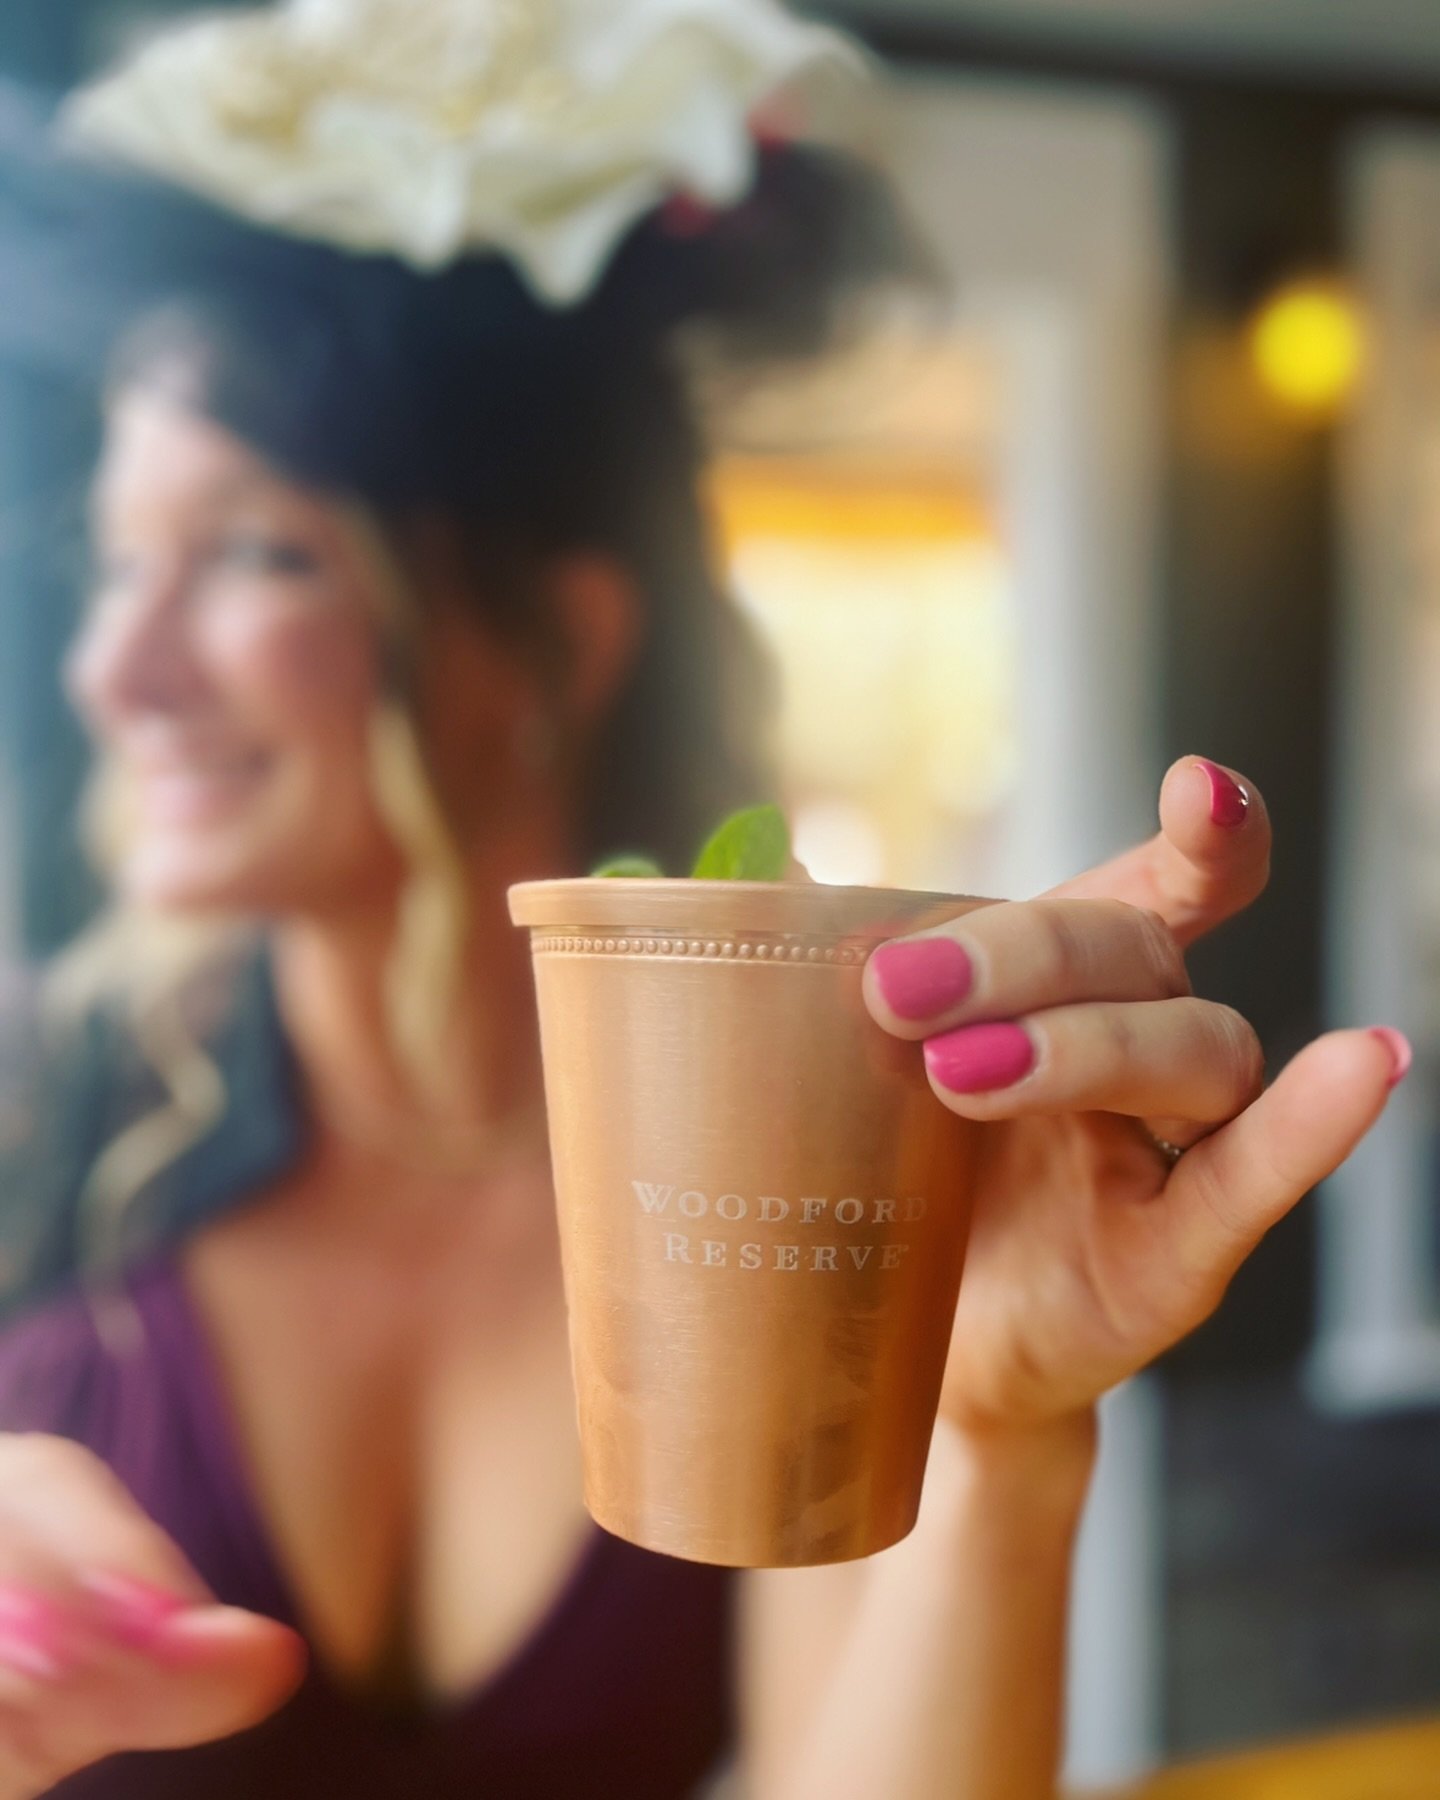 ‼️ Keep the Cup! ‼️ Saturday Derby Day is for Mint Juleps. When you upgrade your Julep to Woodford Reserve you&rsquo;ll be served in a copper cup to keep 👏🏼 While supplies last, of course. Live music is bluegrassy and brought by Jim, Peter, Glenn a